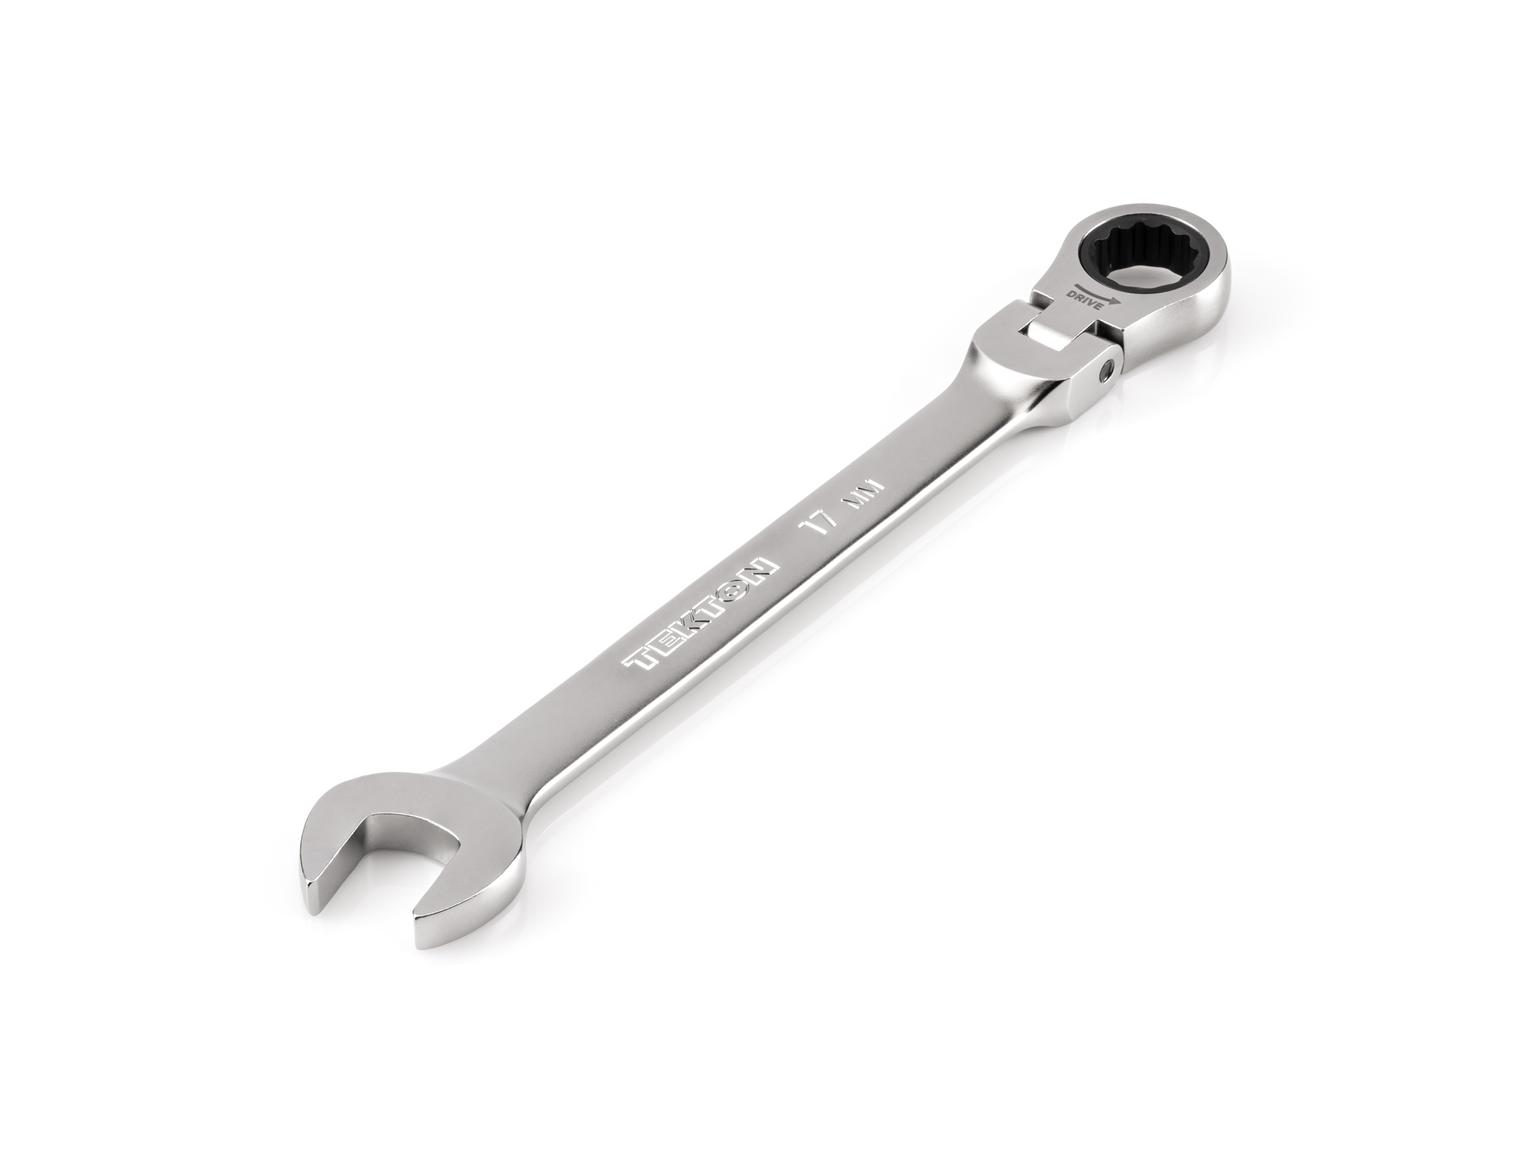 TEKTON WRC26417-T 17 mm Flex Head 12-Point Ratcheting Combination Wrench